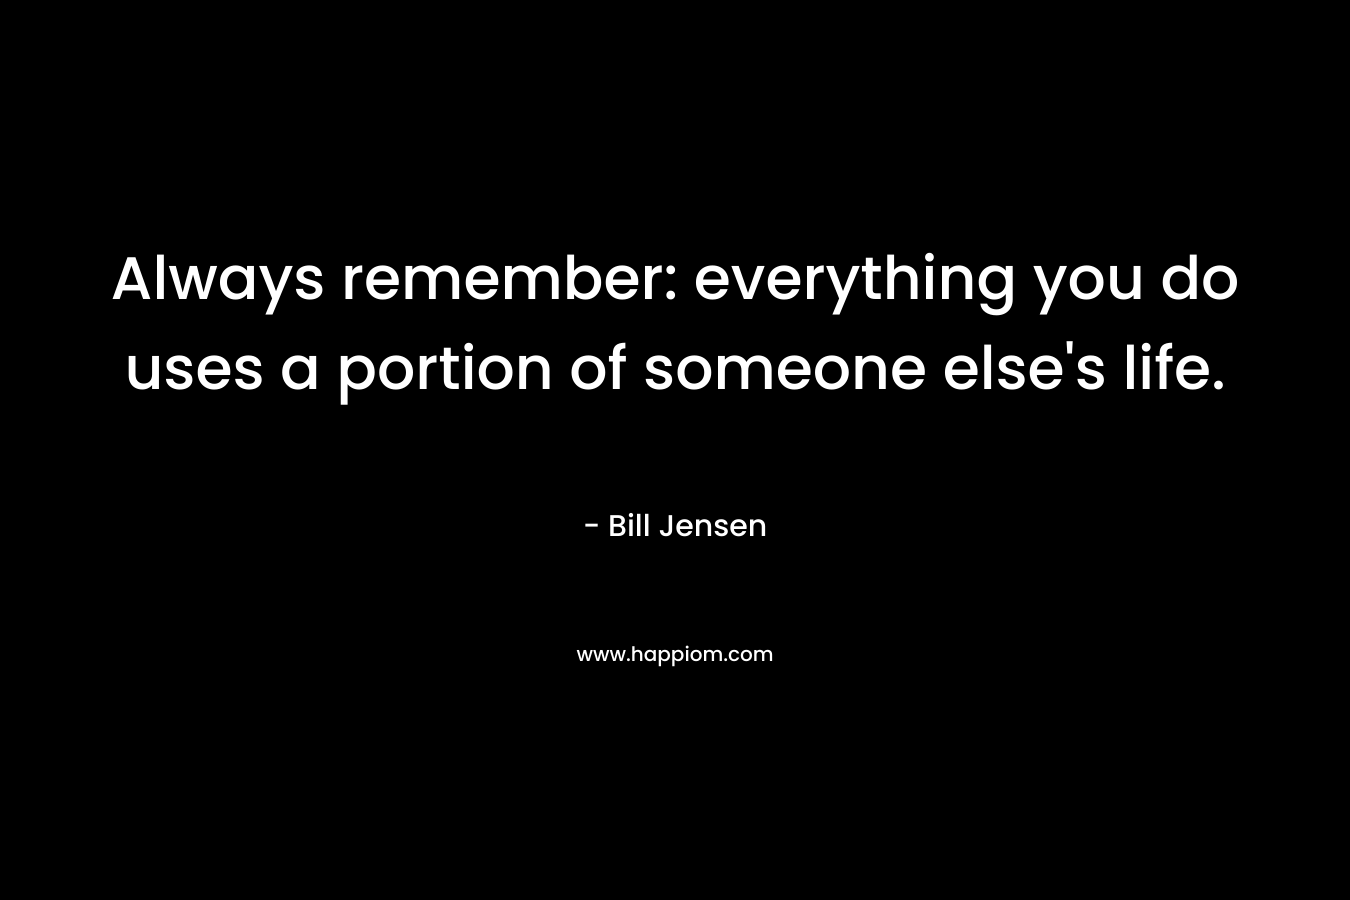 Always remember: everything you do uses a portion of someone else’s life. – Bill Jensen